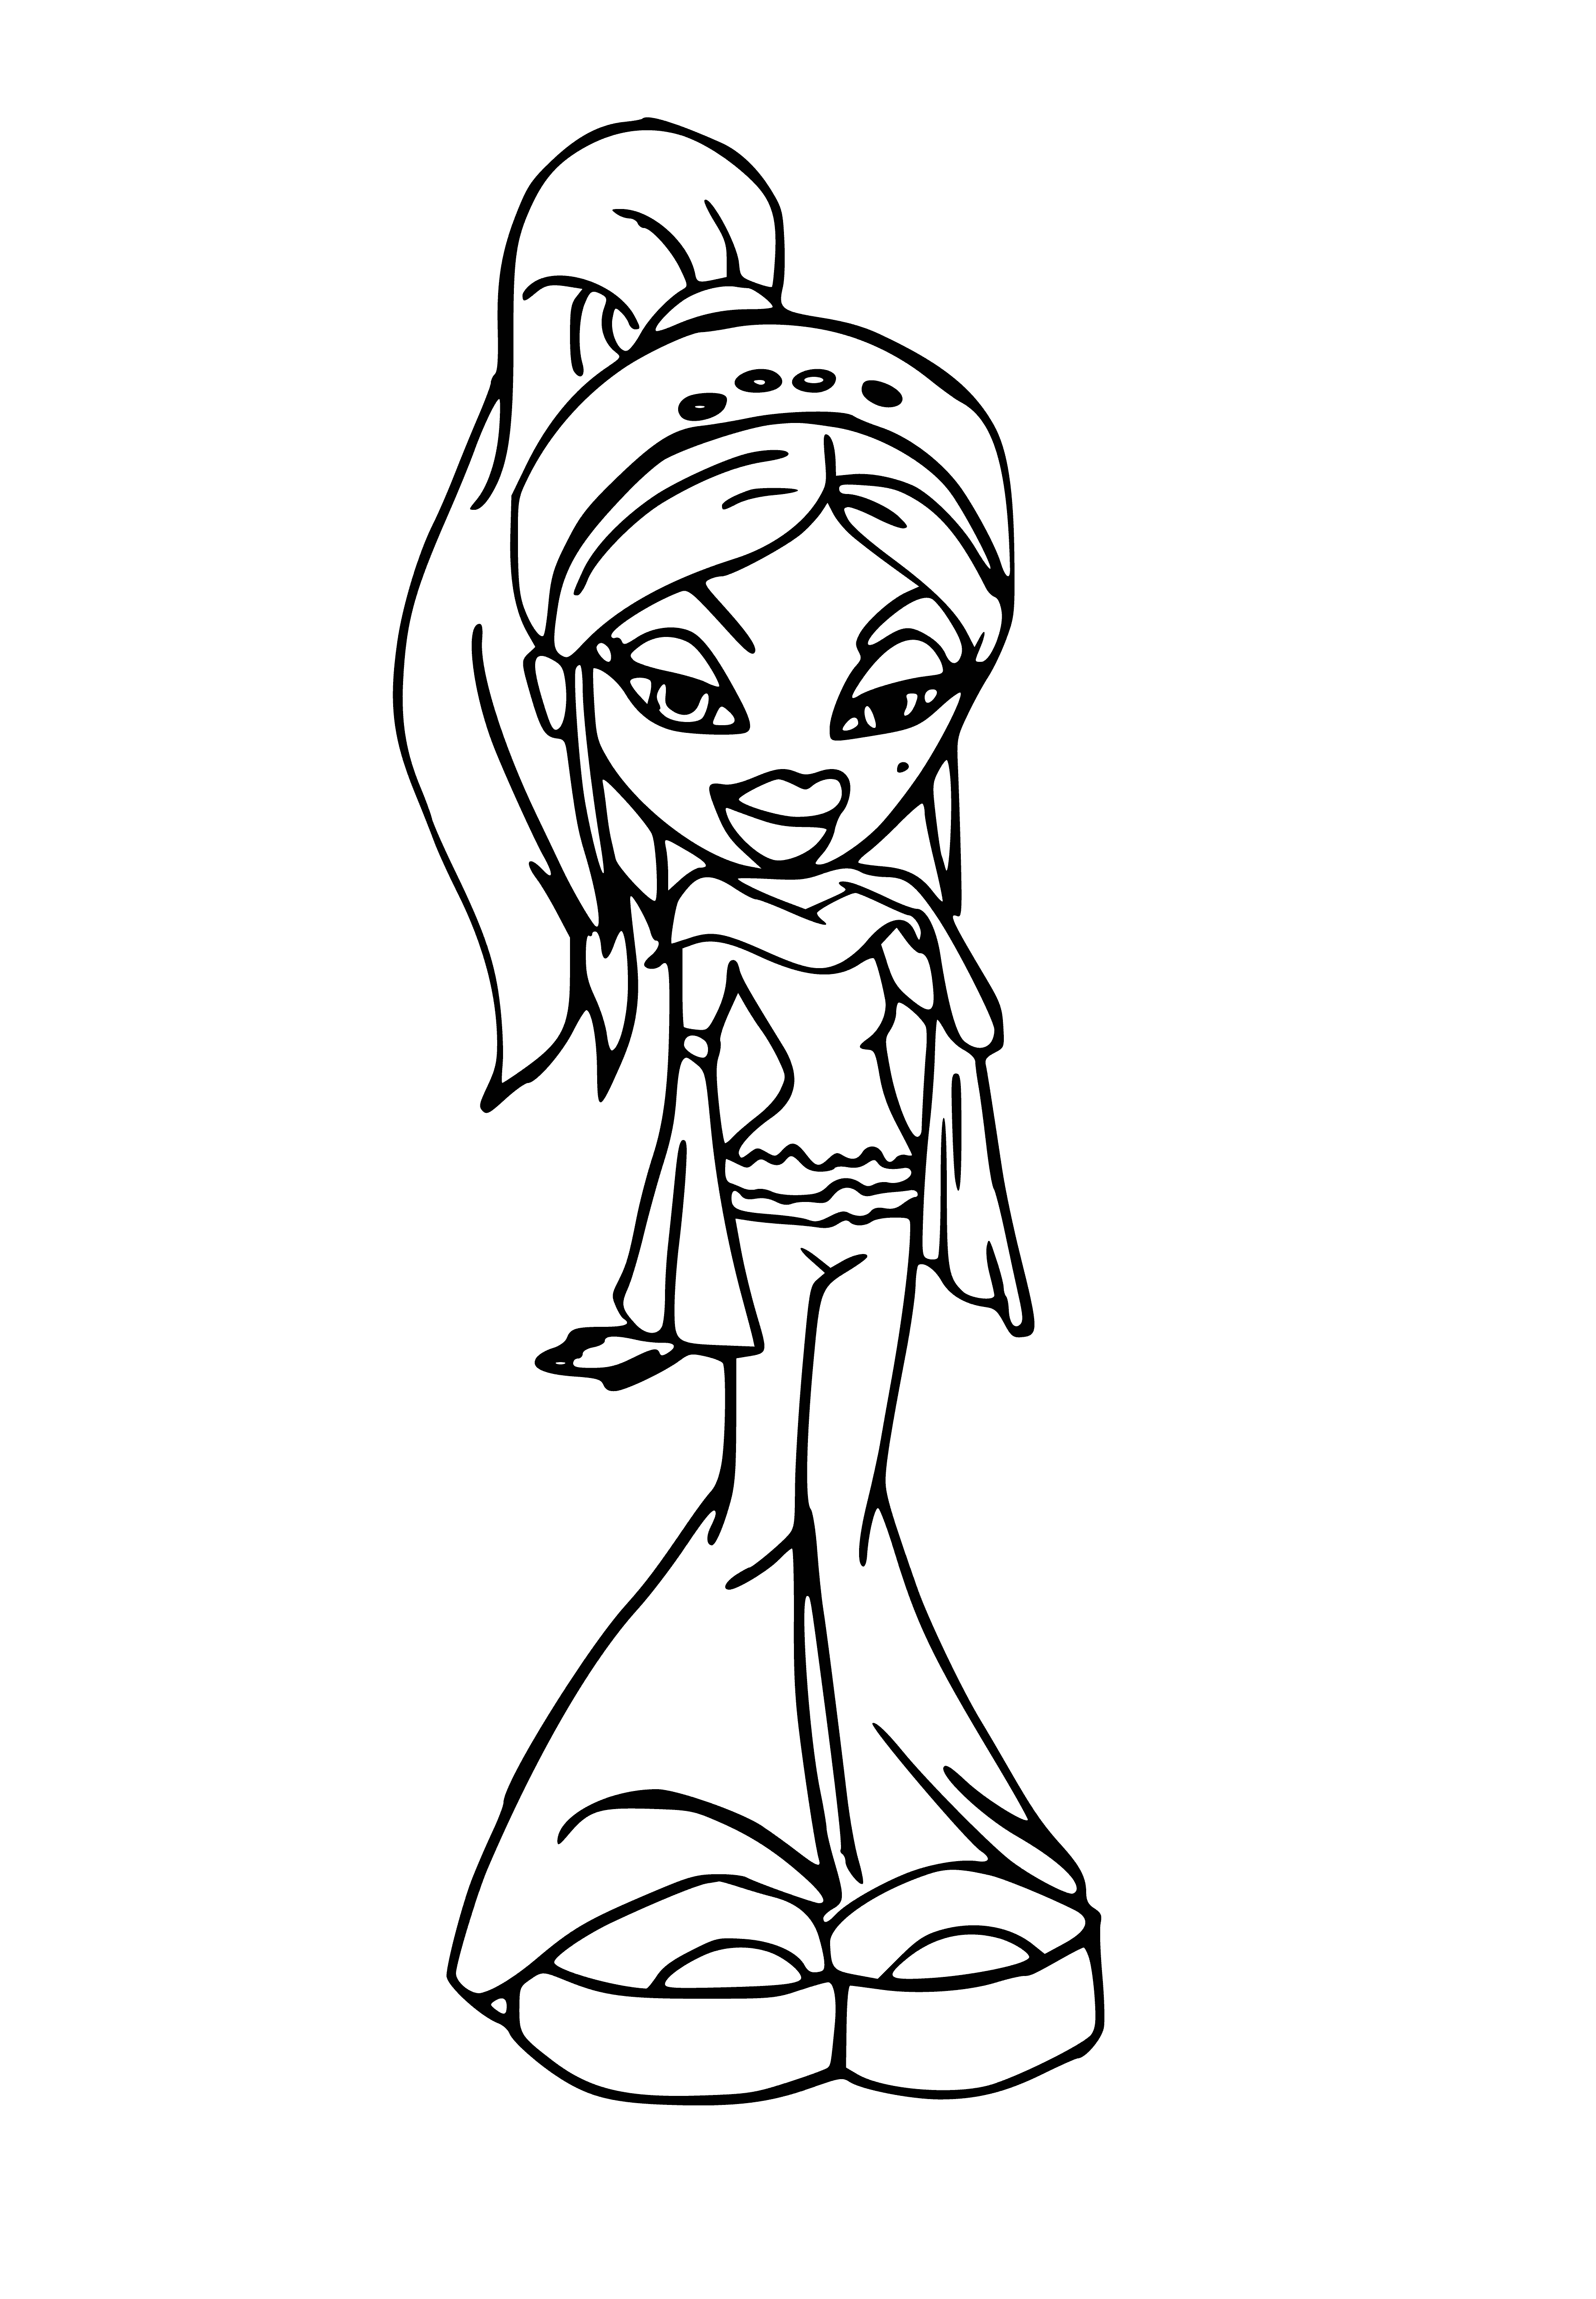 coloring page: Four dolls with different outfits on a coloring page.